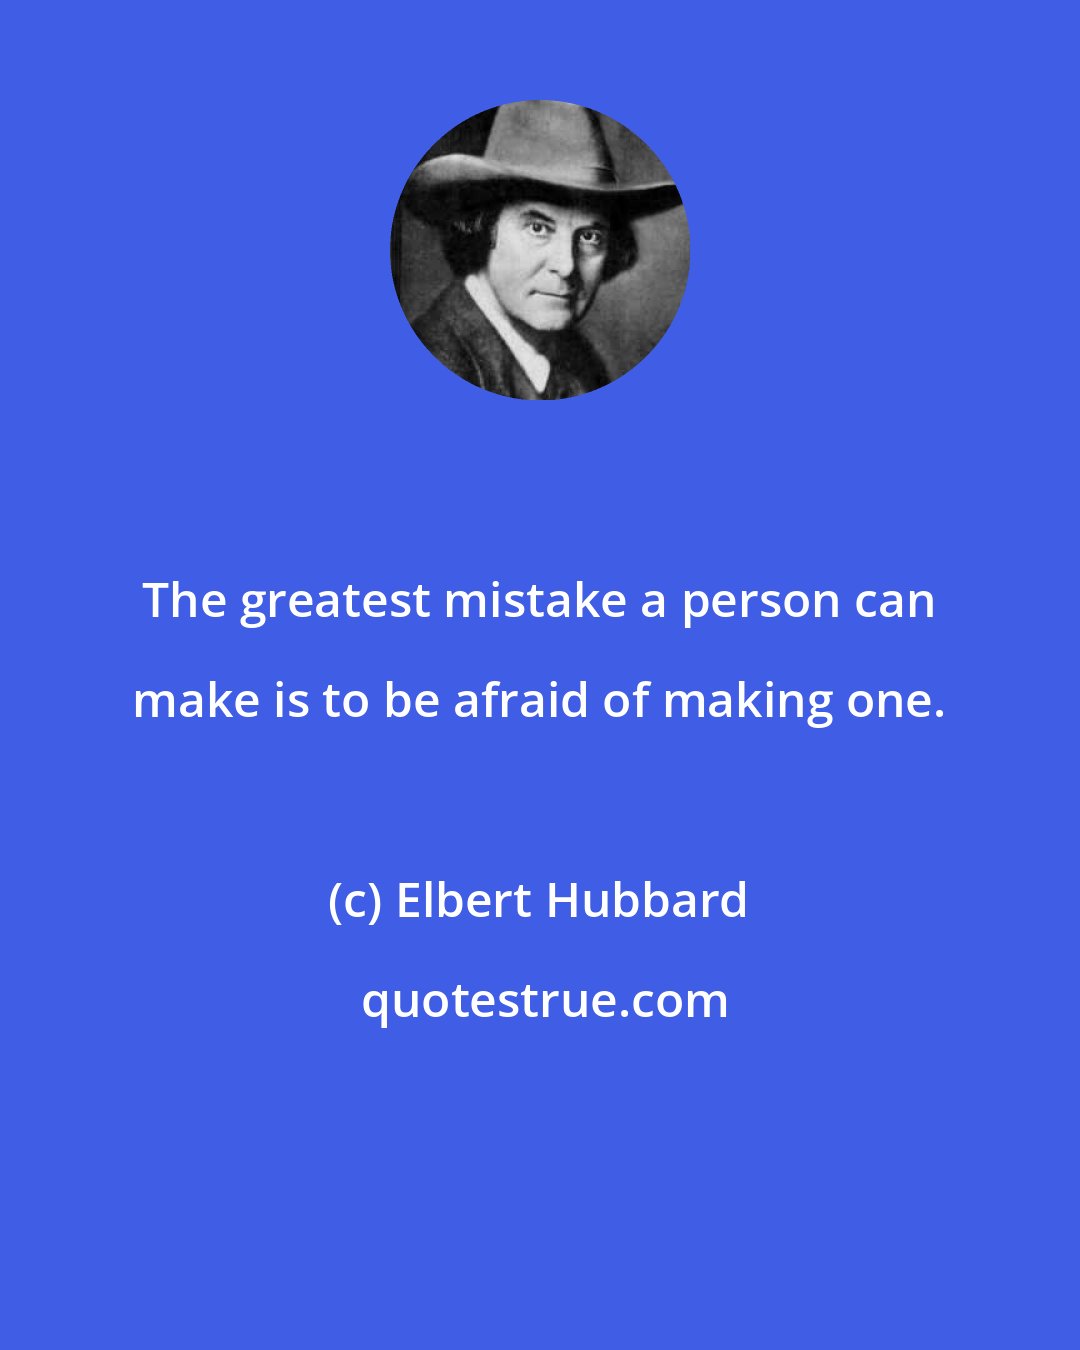 Elbert Hubbard: The greatest mistake a person can make is to be afraid of making one.